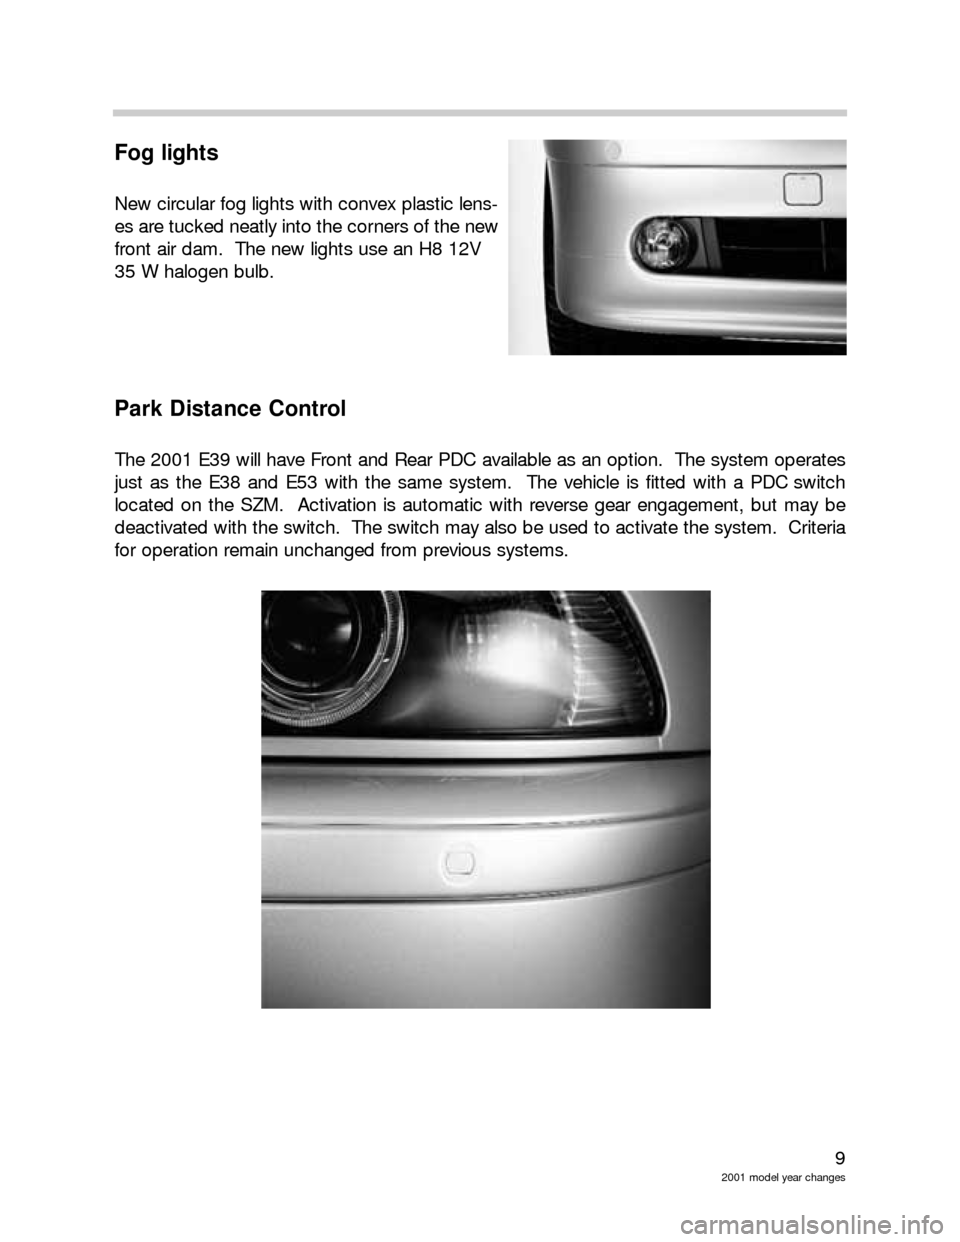 BMW X5 2003 E53 Model Yar Changes 9
2001 model year changes
Fog lights
New circular fog lights with convex plastic lens-
es are tucked neatly into the corners of the new
front air dam.  The new lights use an H8 12V 
35 W halogen bulb.